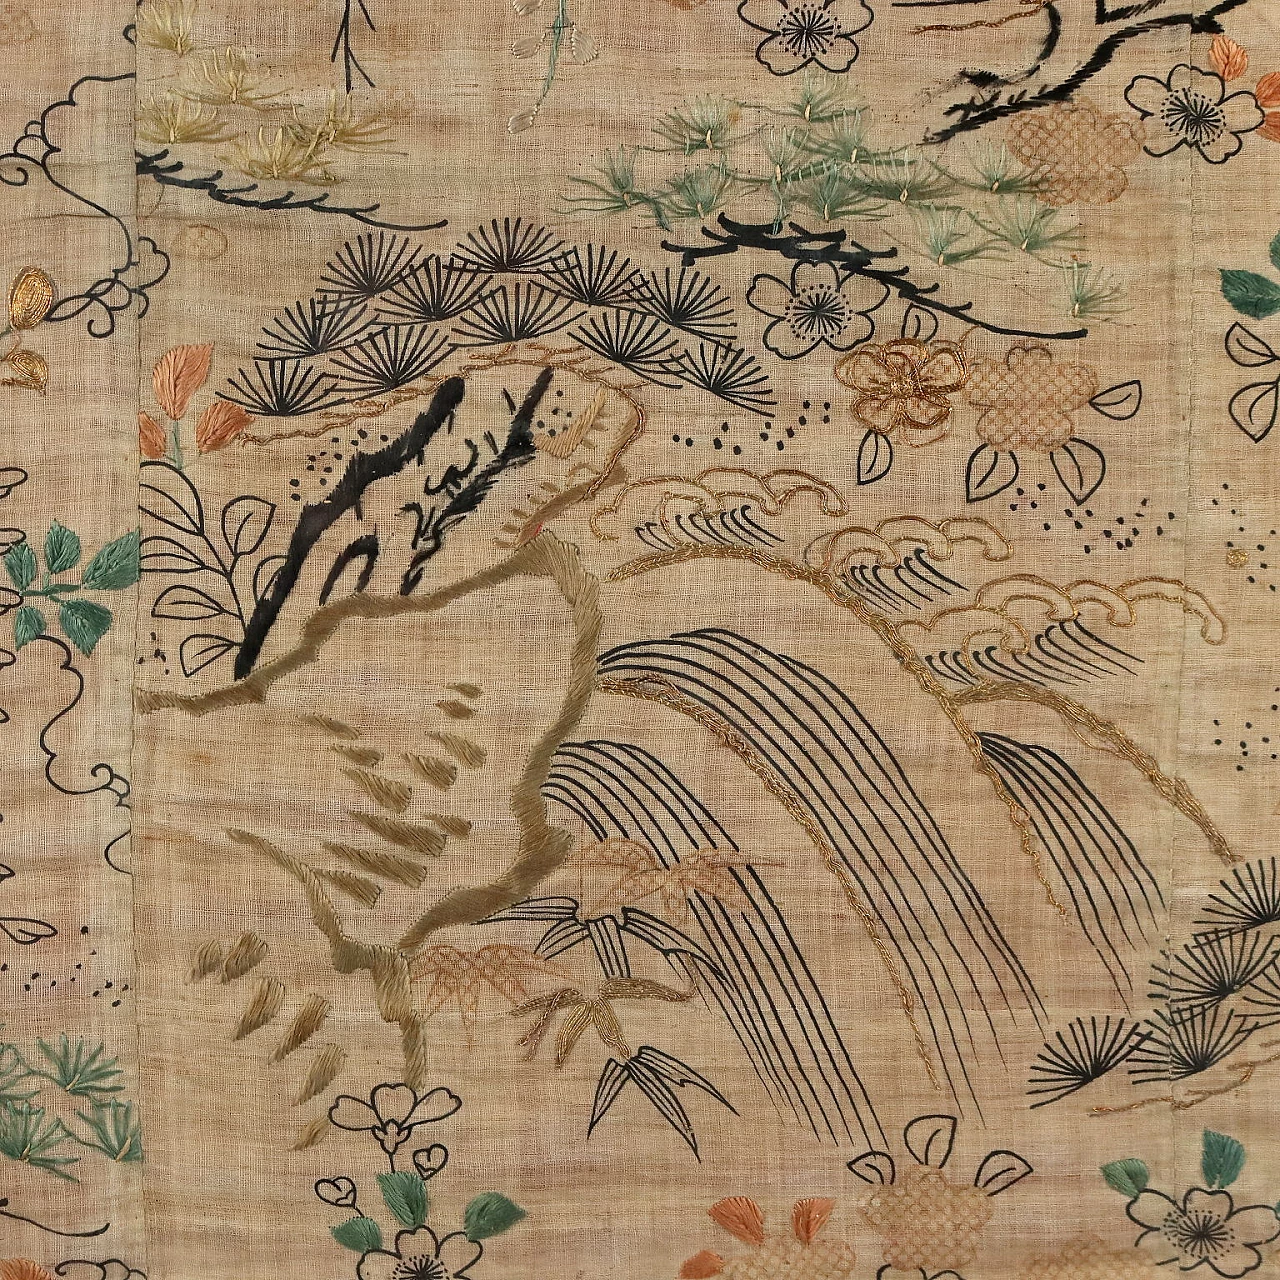 Naturalistic subject, embroidery panel, late 19th century 5